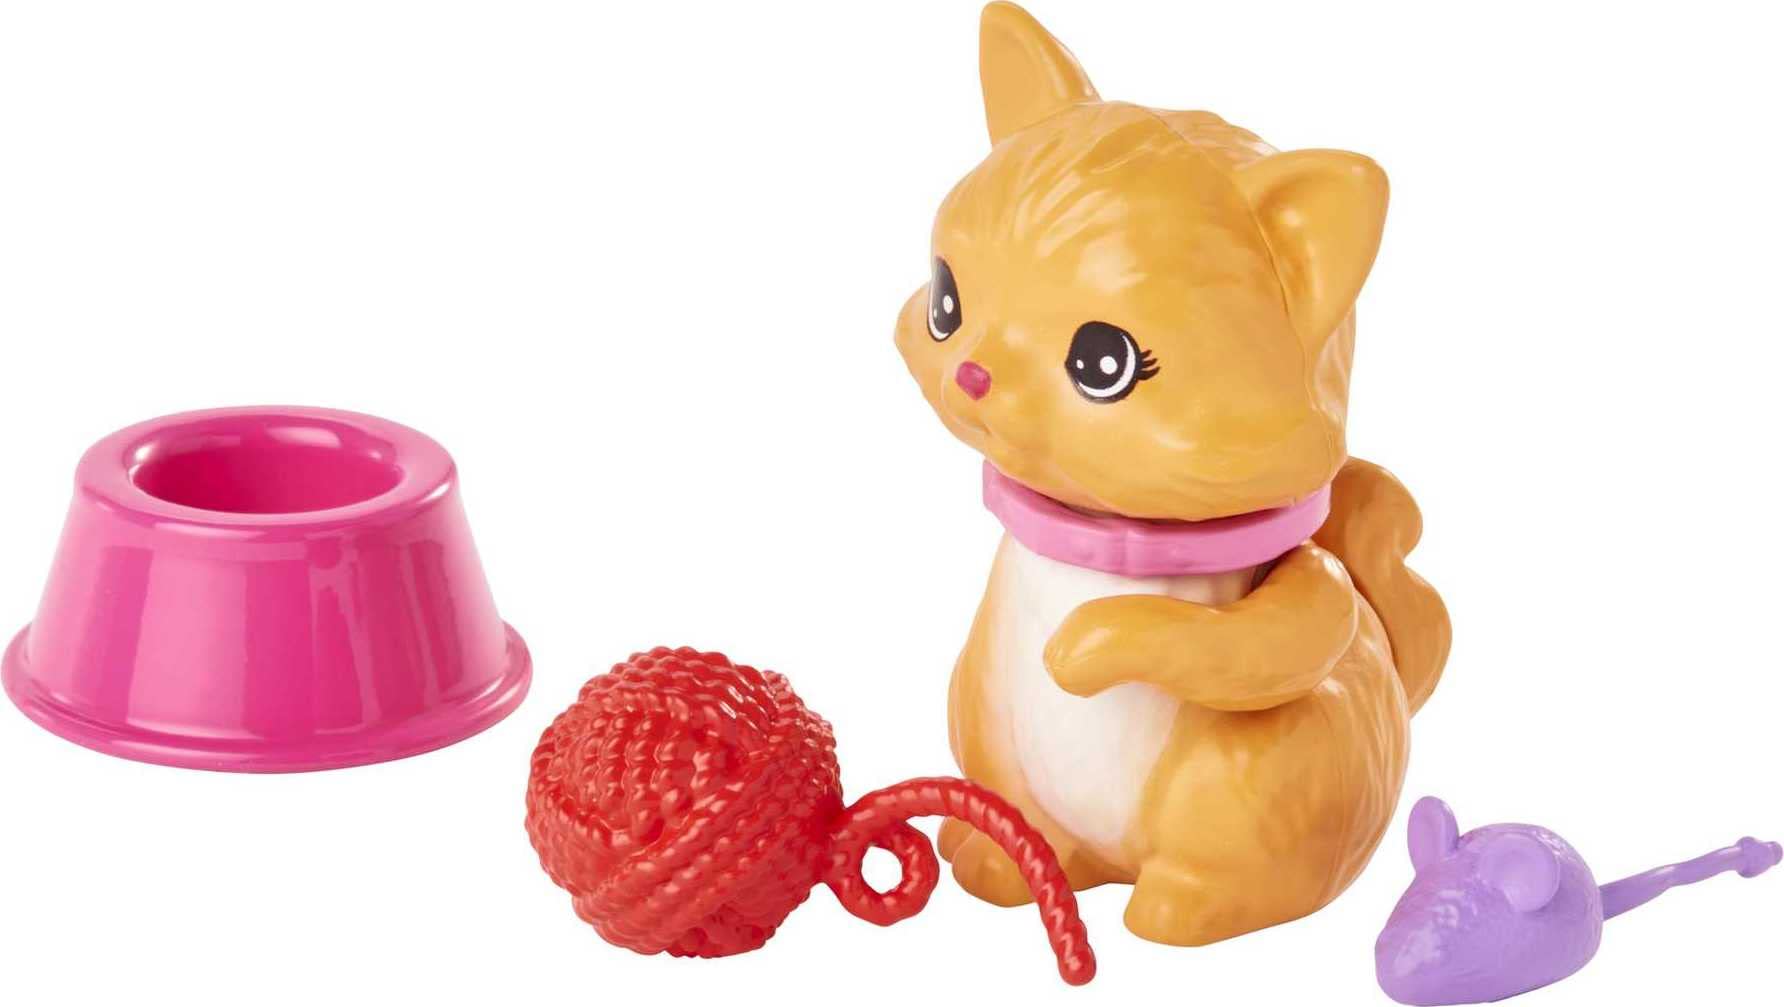 Barbie Pets and Accessories, Interactive Kitty Playset with Moving Paw and Head, 11 Animal Themed Pieces